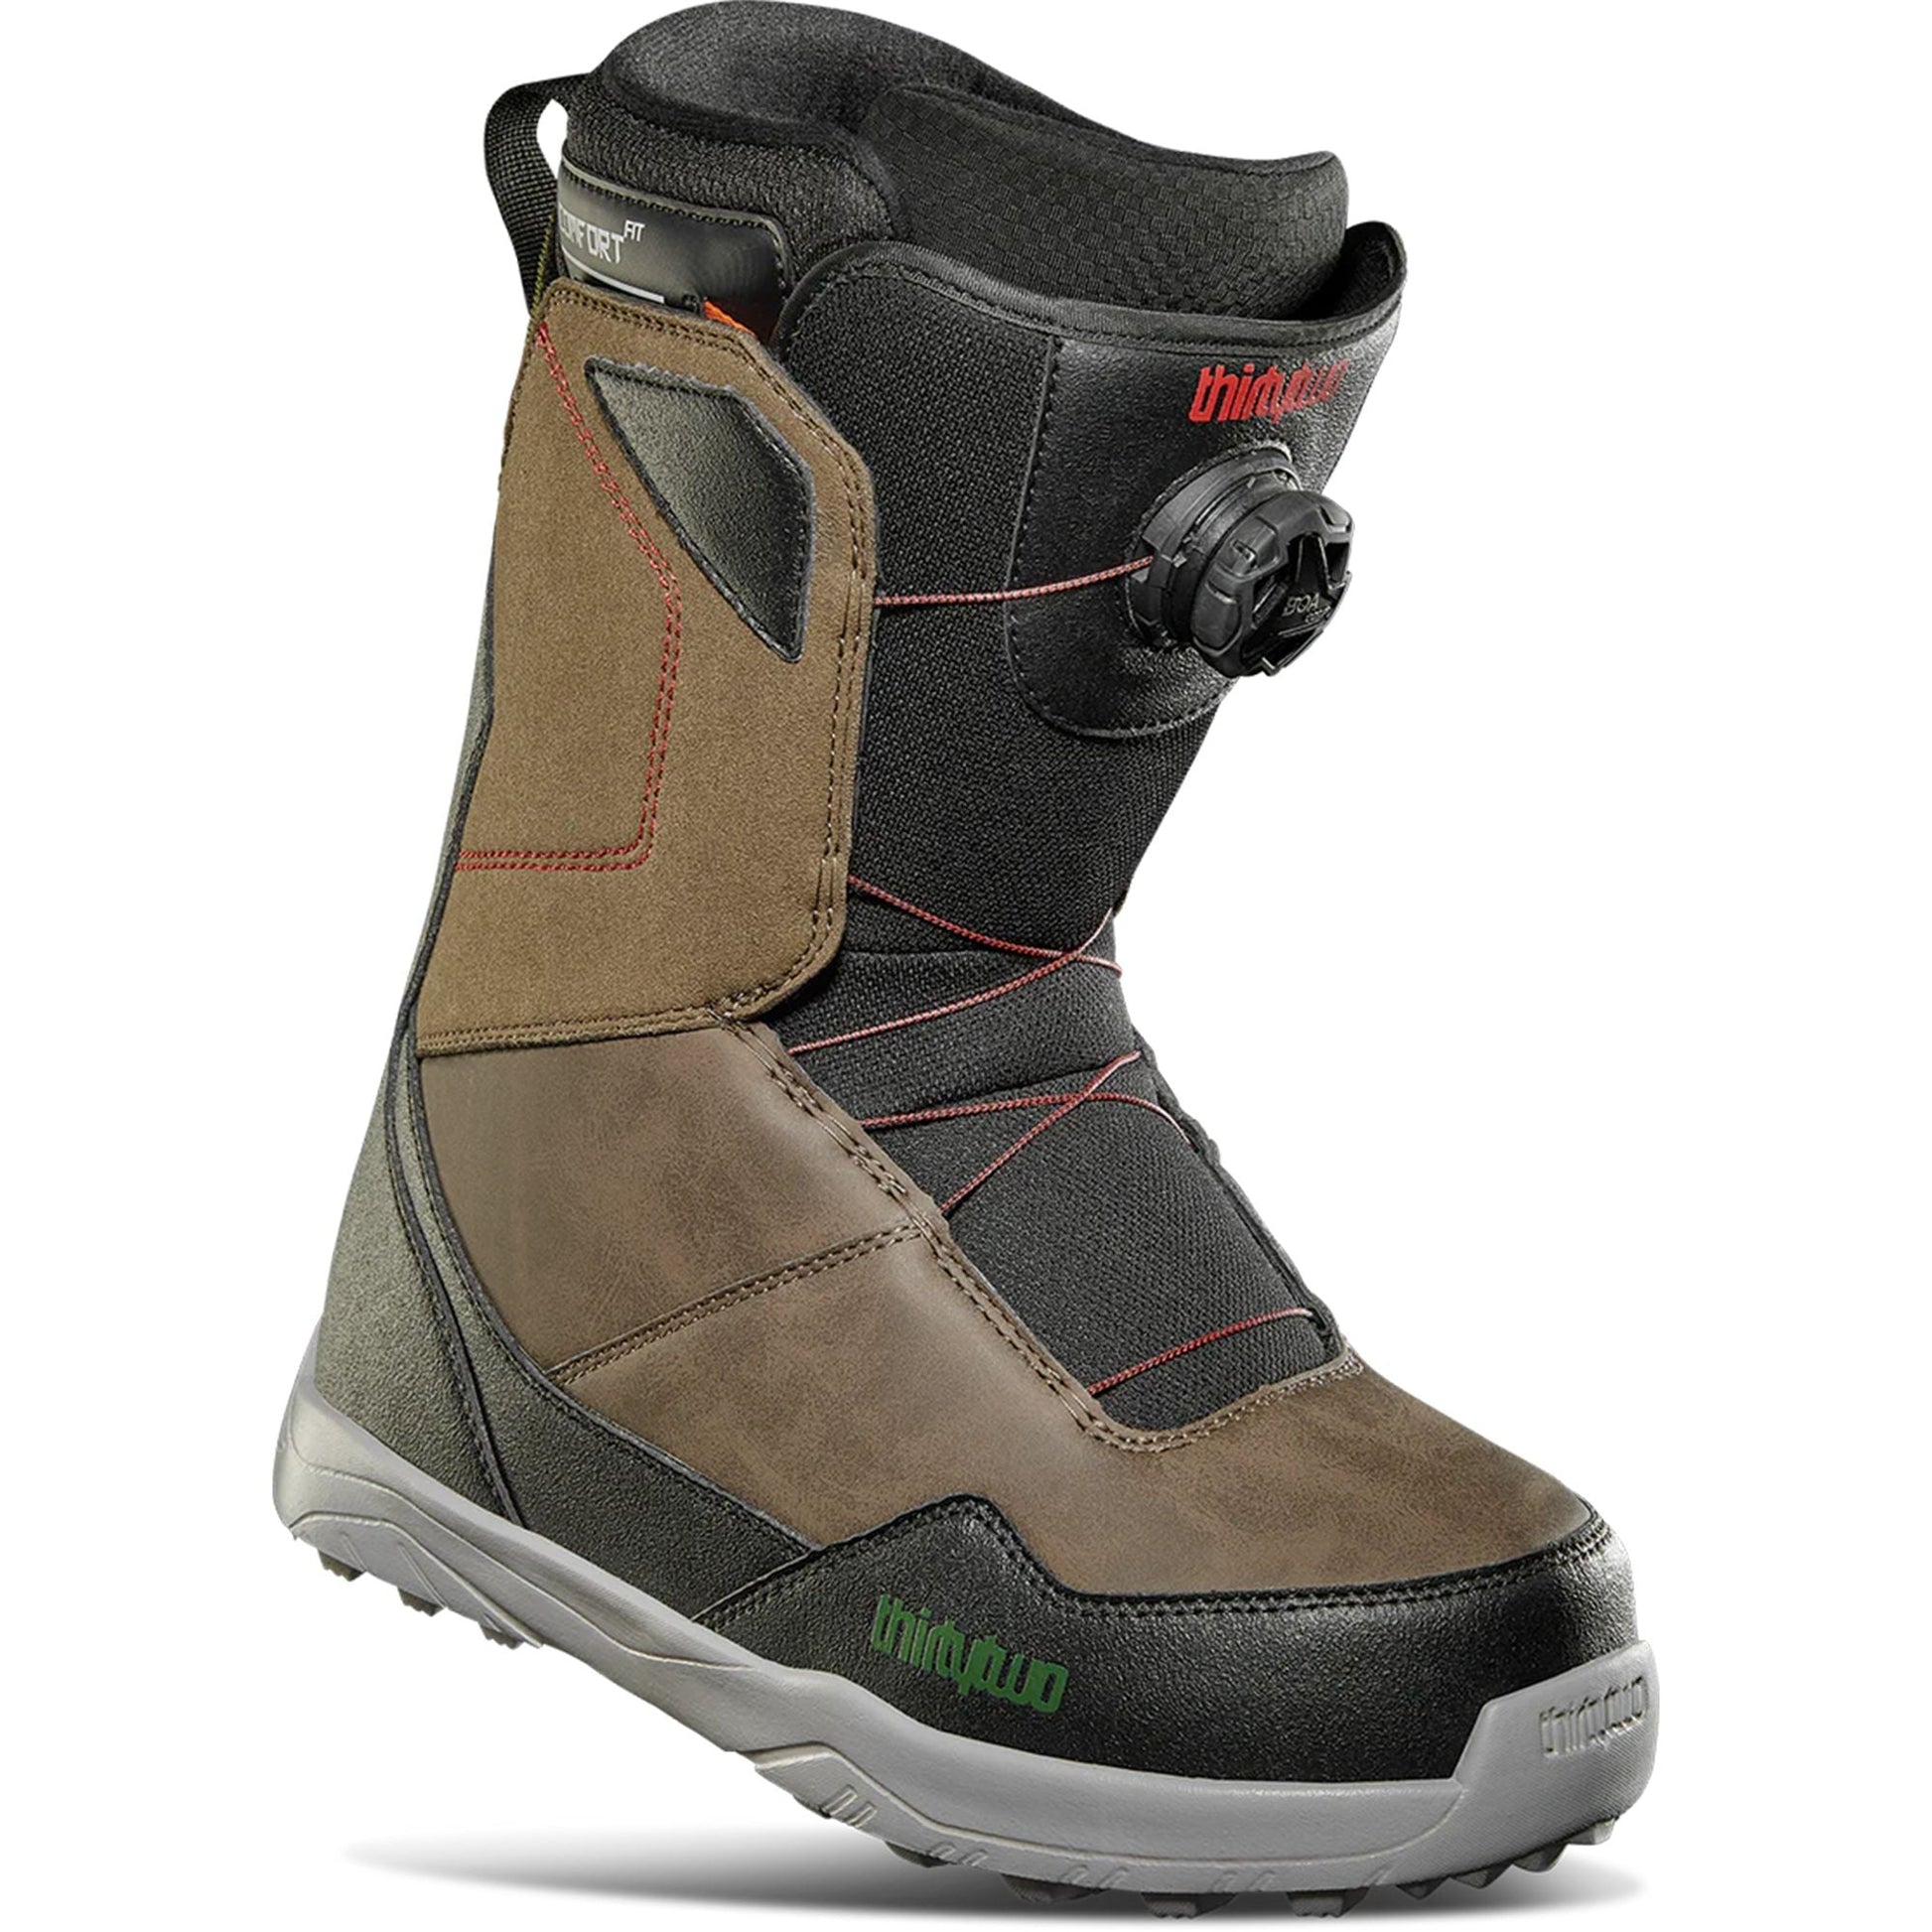 ThirtyTwo Shifty BOA Snowboard Boots - OpenBox Black Brown Snowboard Boots